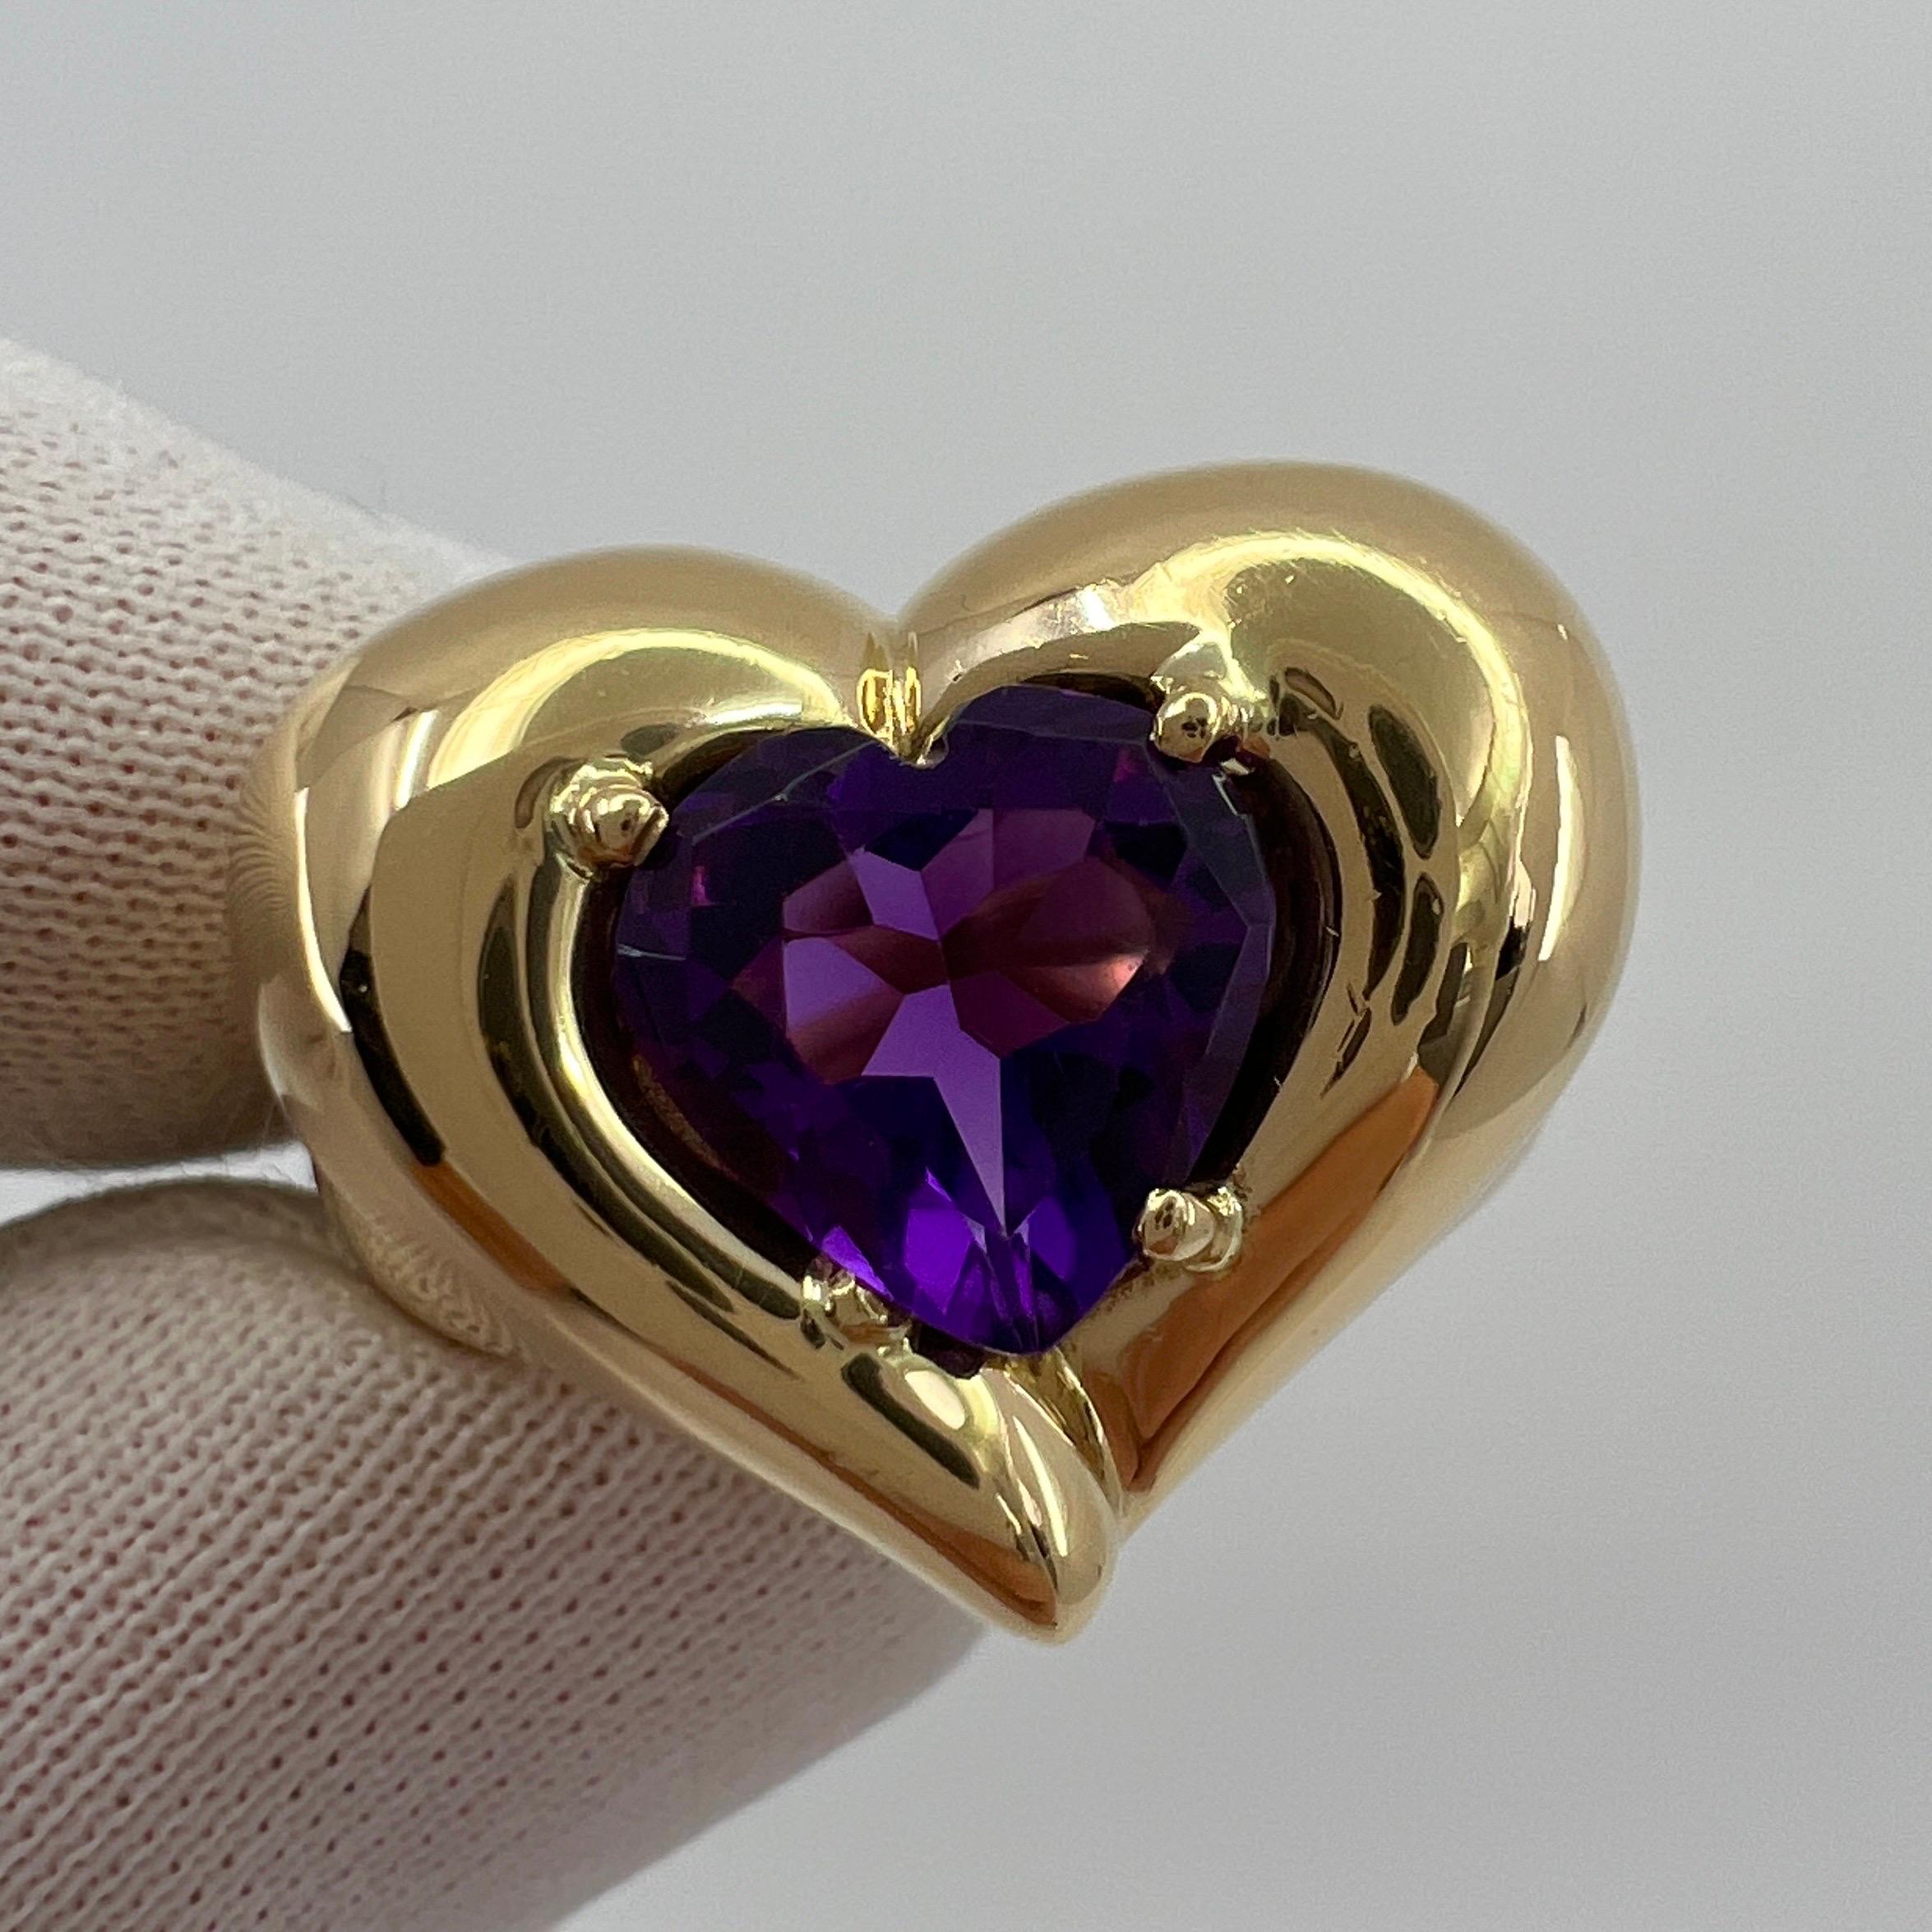 Rare Vintage Van Cleef & Arpels 18k Yellow Gold Amethyst Heart Ring with Box 1